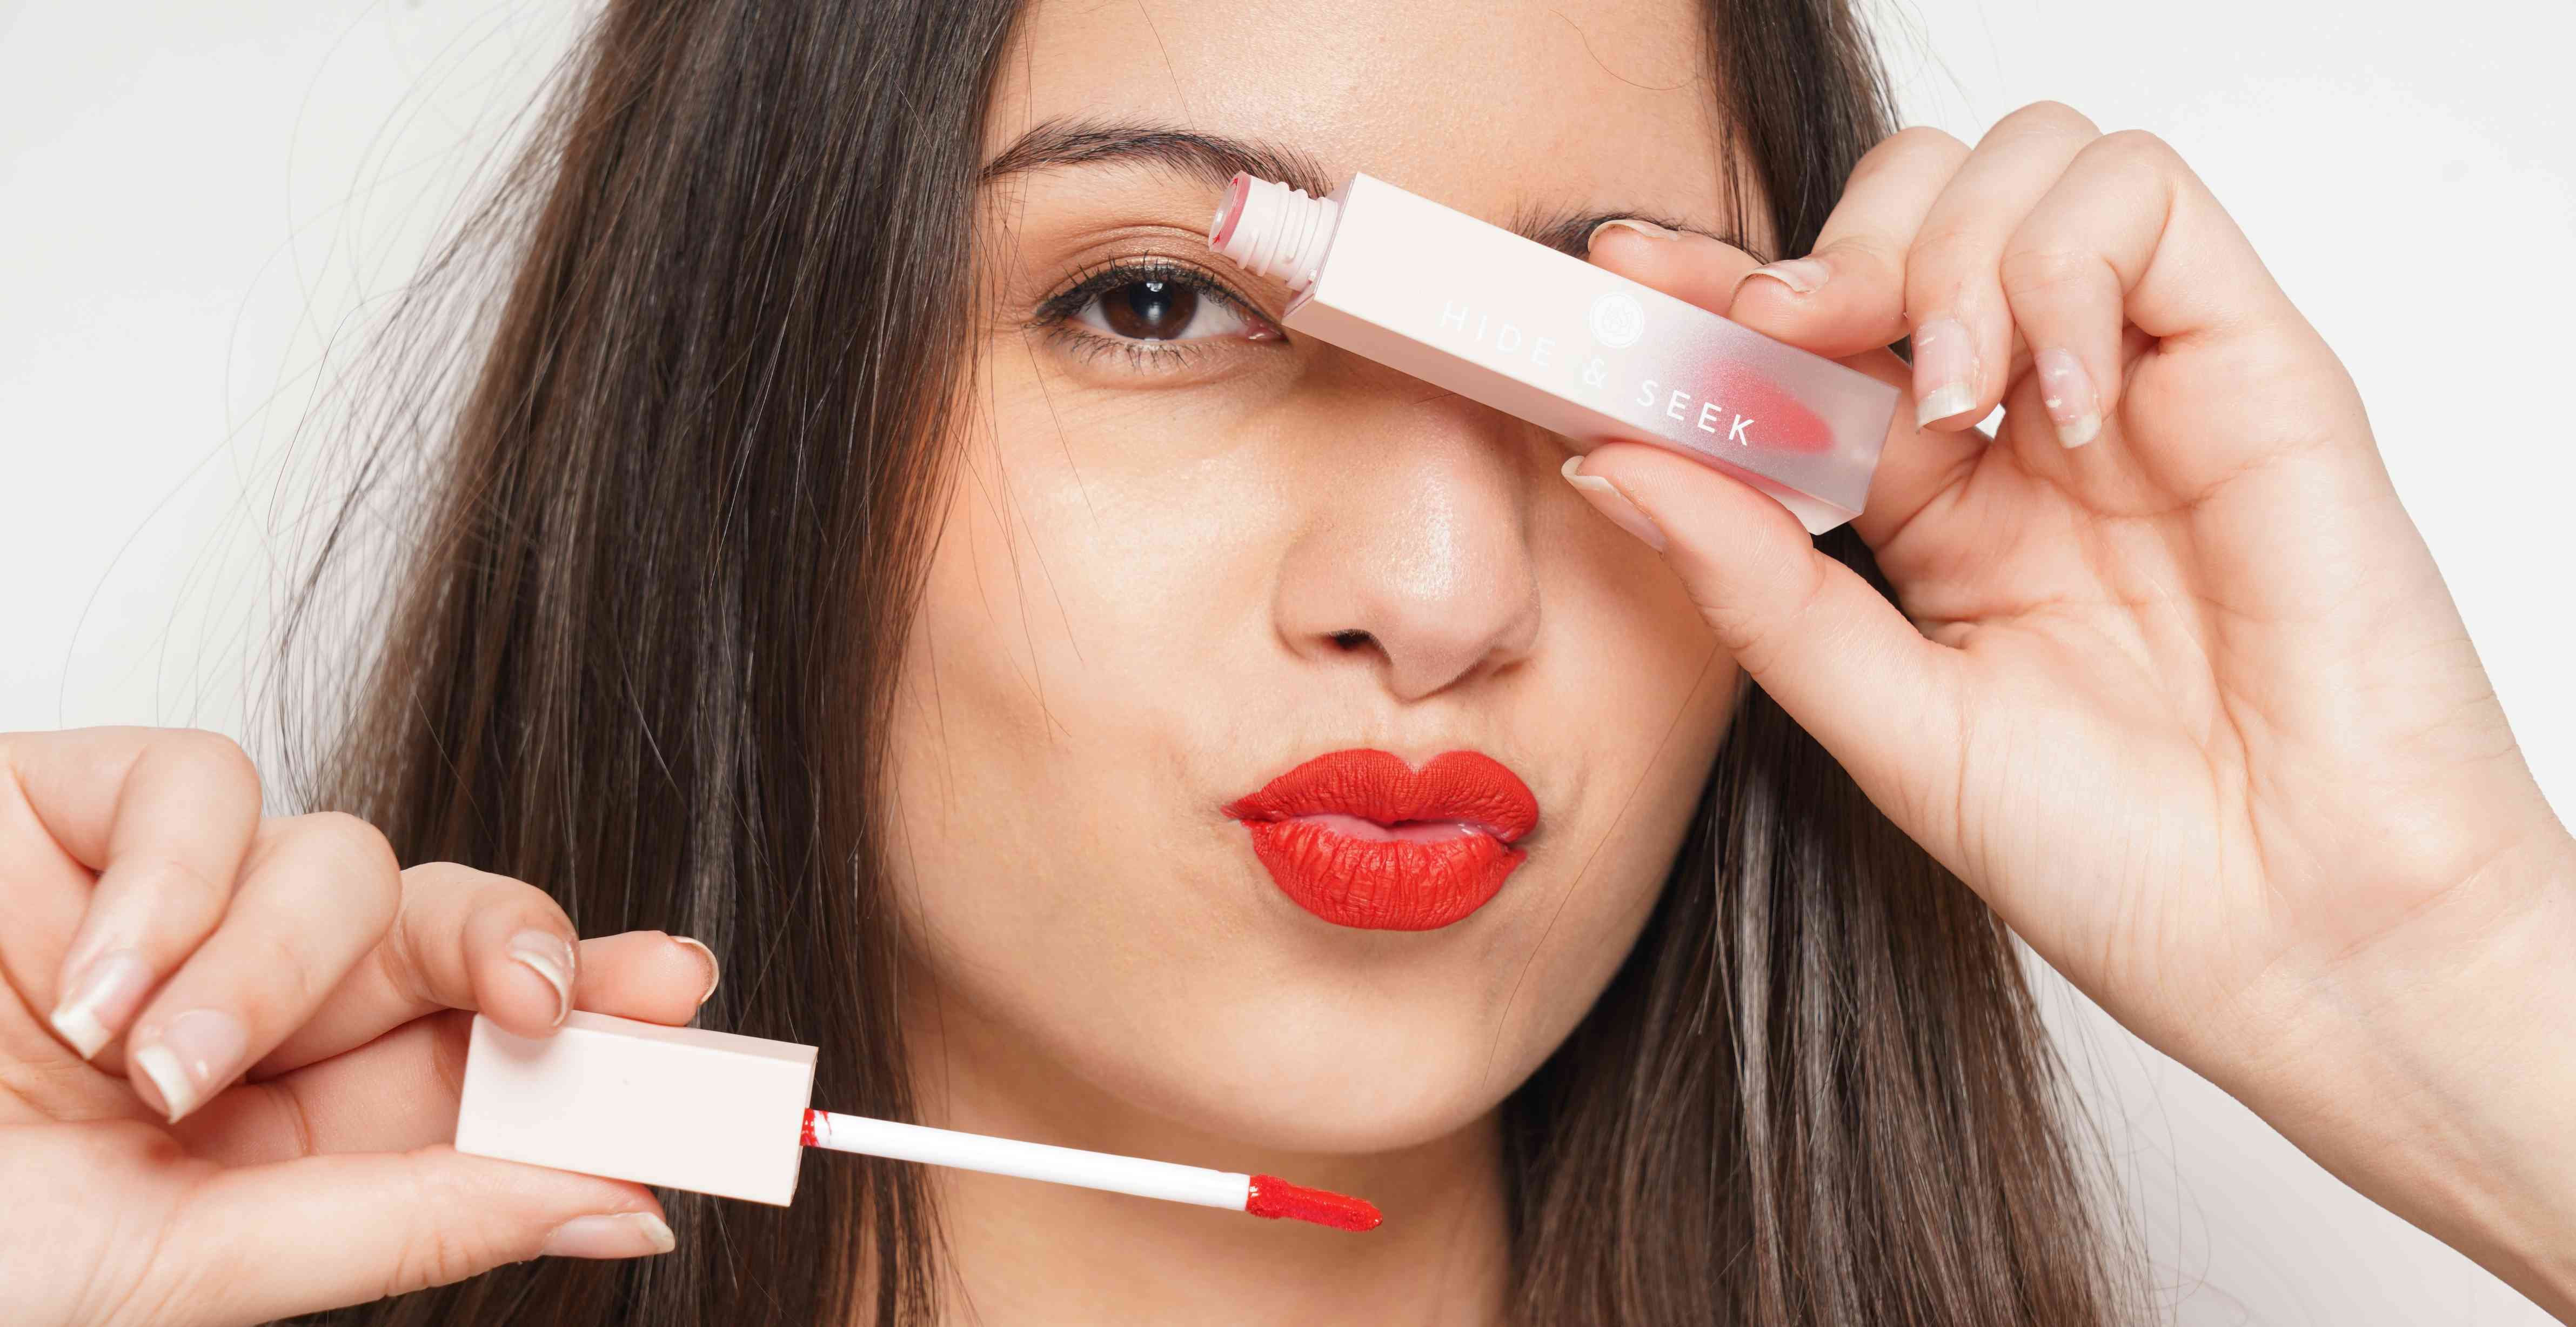 5 types of lipstick for easy and quick make-up